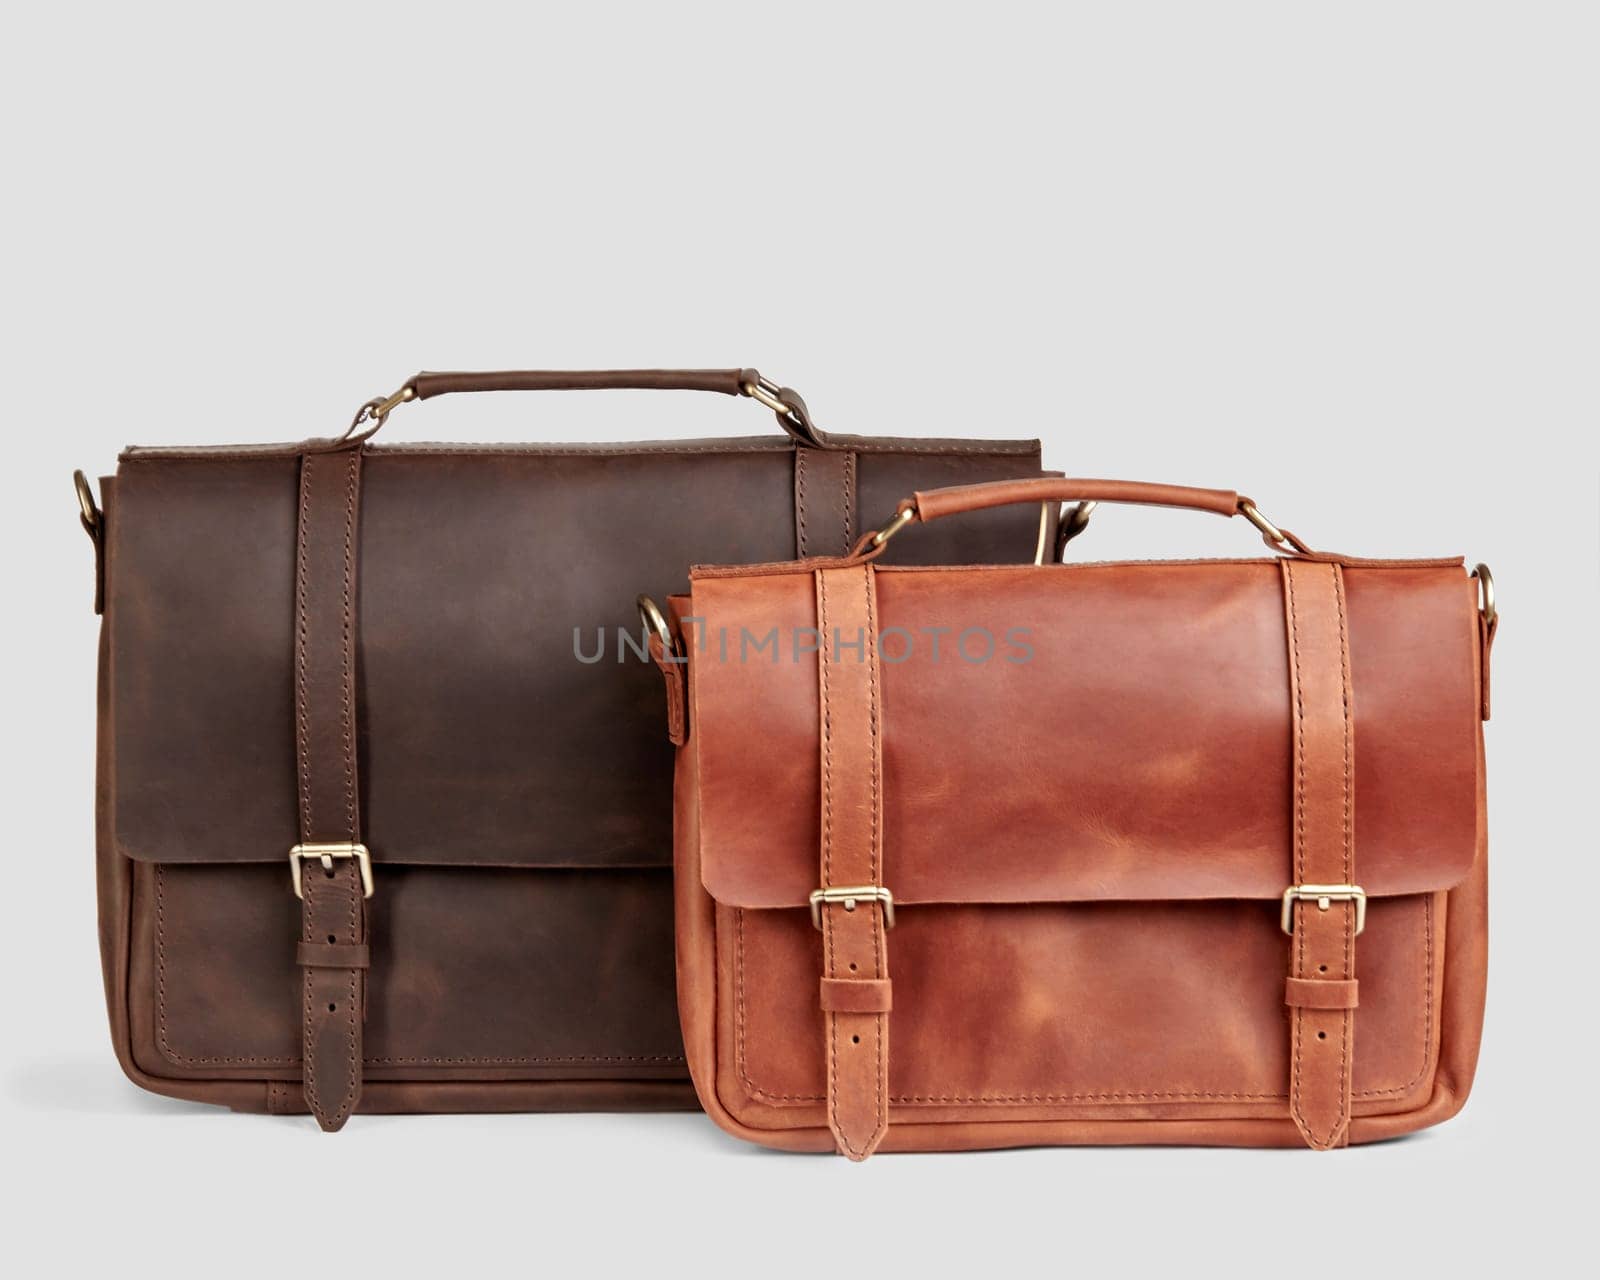 Stylish comfortable dark brown and copper colored leather messenger bags of different sizes with embossed initials, presented on light backdrop